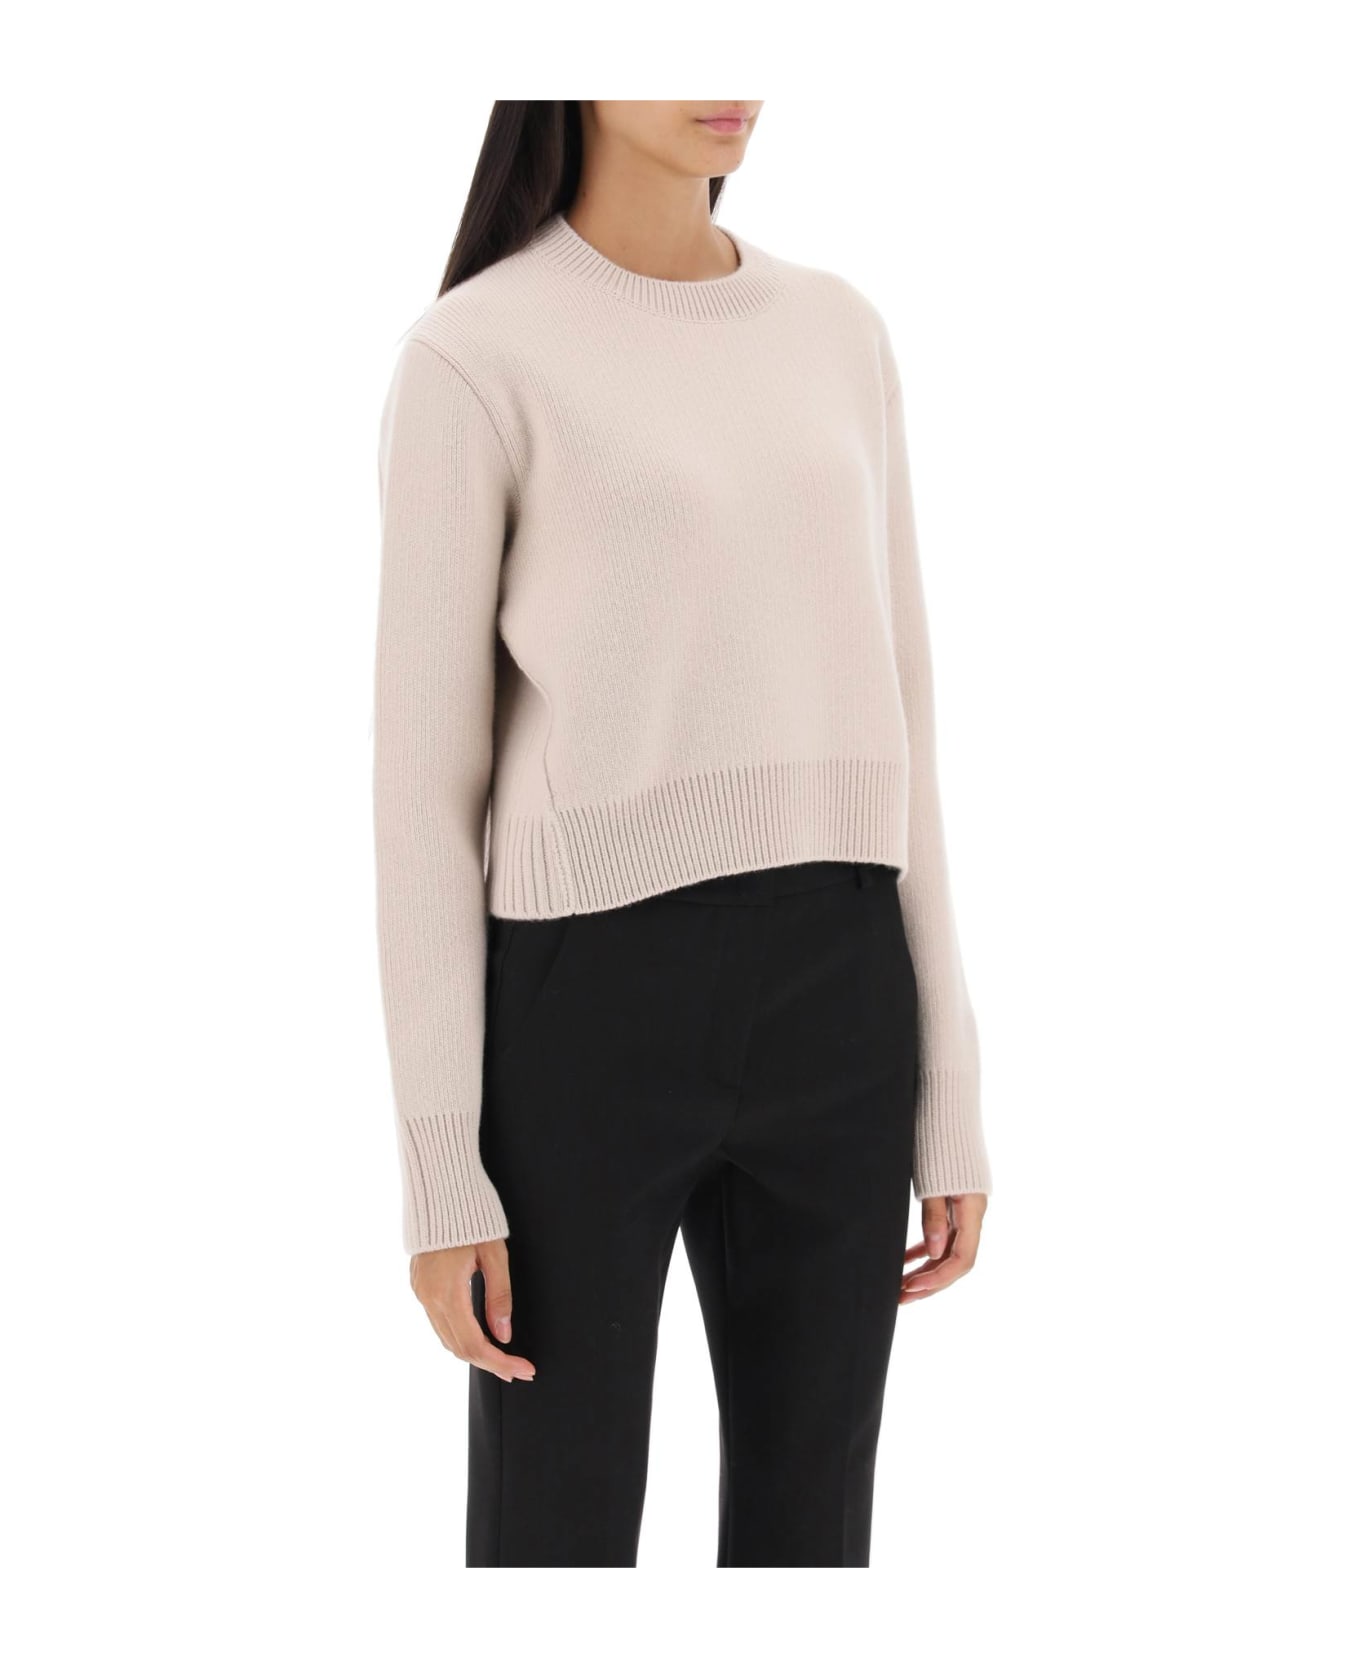 Lanvin Cropped Wool And Cashmere Sweater - PAPER (Beige)